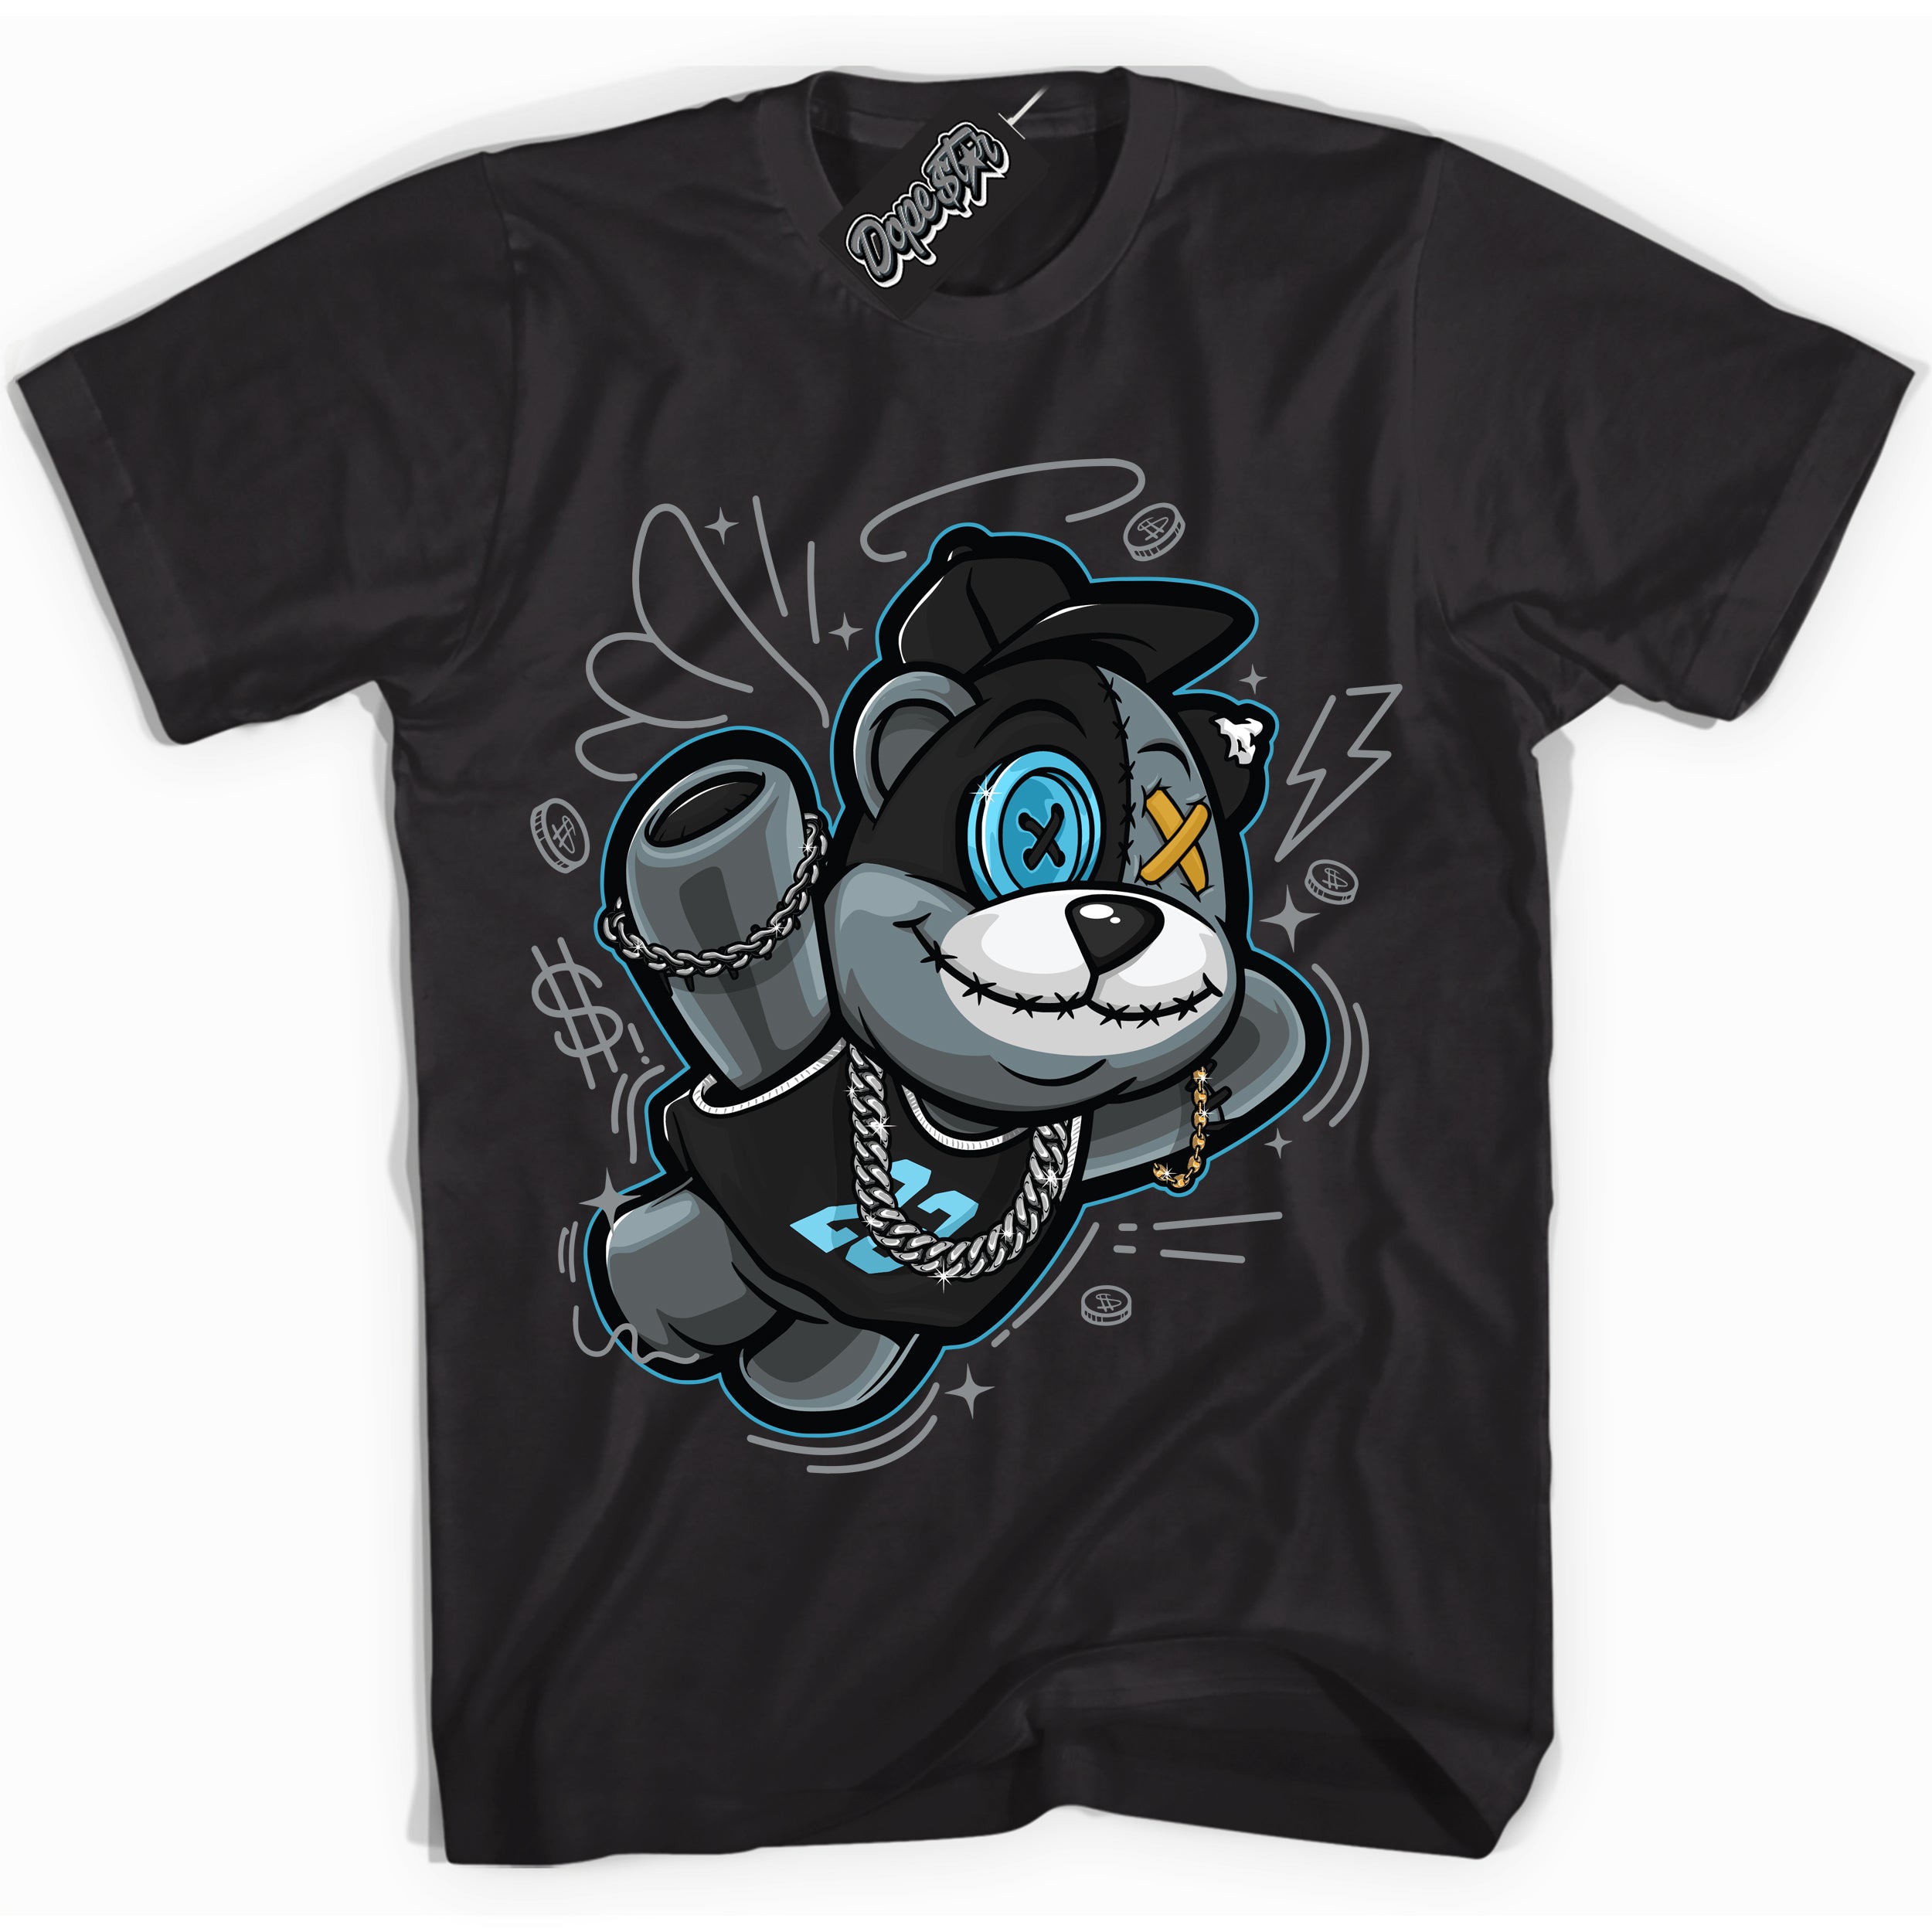 Cool Black Shirt with “ Slam Dunk Bear” design that perfectly matches Aqua 5s Sneakers.